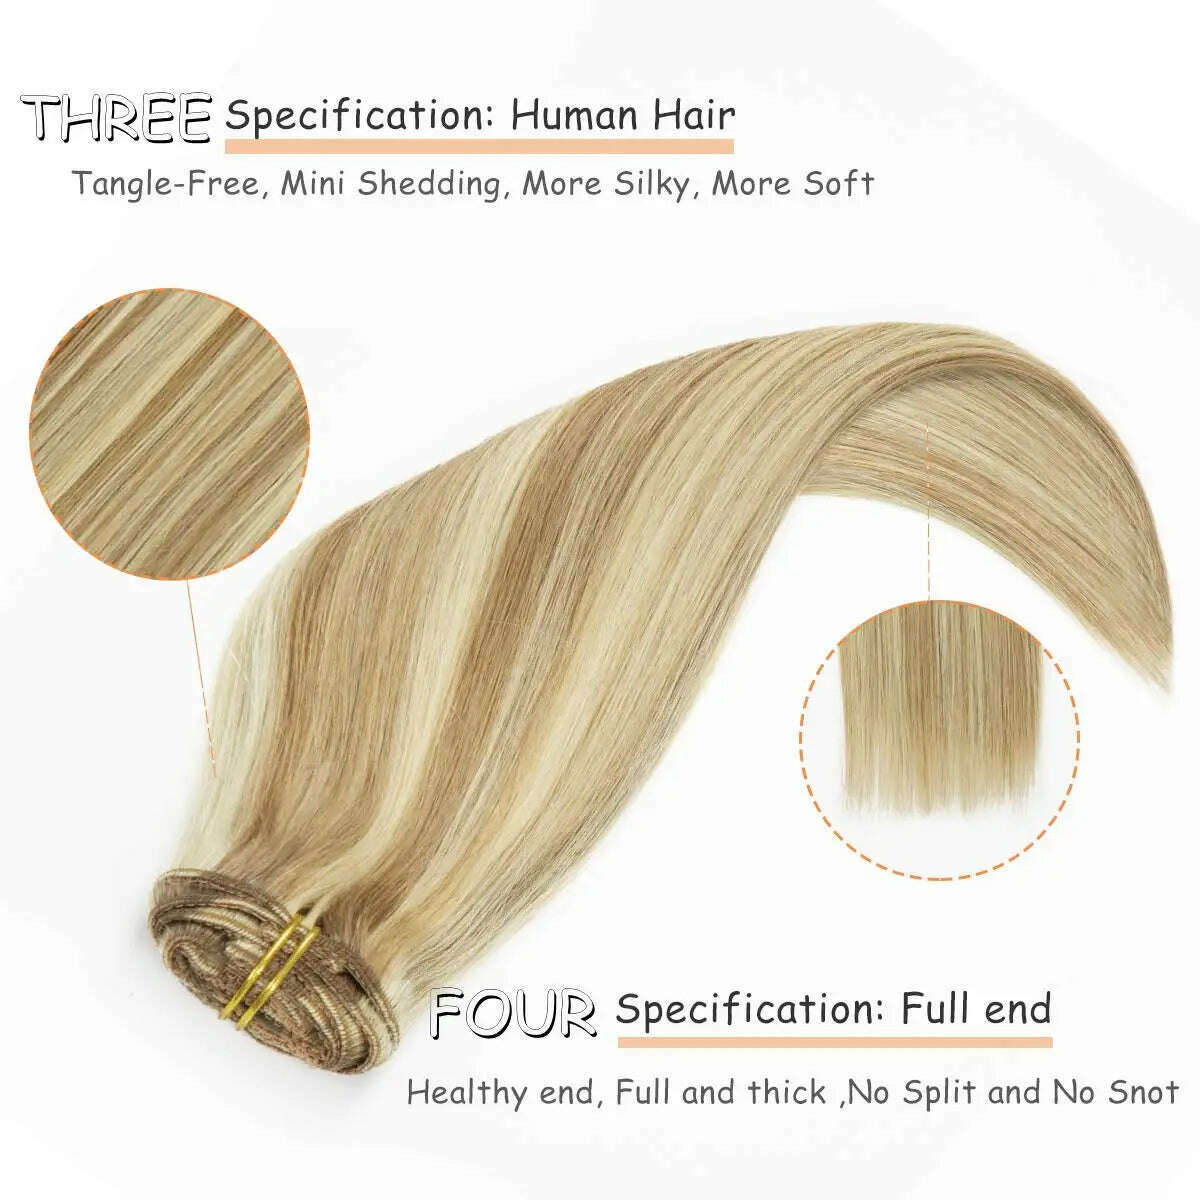 KIMLUD, 120G Clip In Hair Extension Human Hair Color P8/613 Straight Brazilian 100% Human Hair Extension Clip In 8 Pieces/Sets Full Head, KIMLUD Womens Clothes